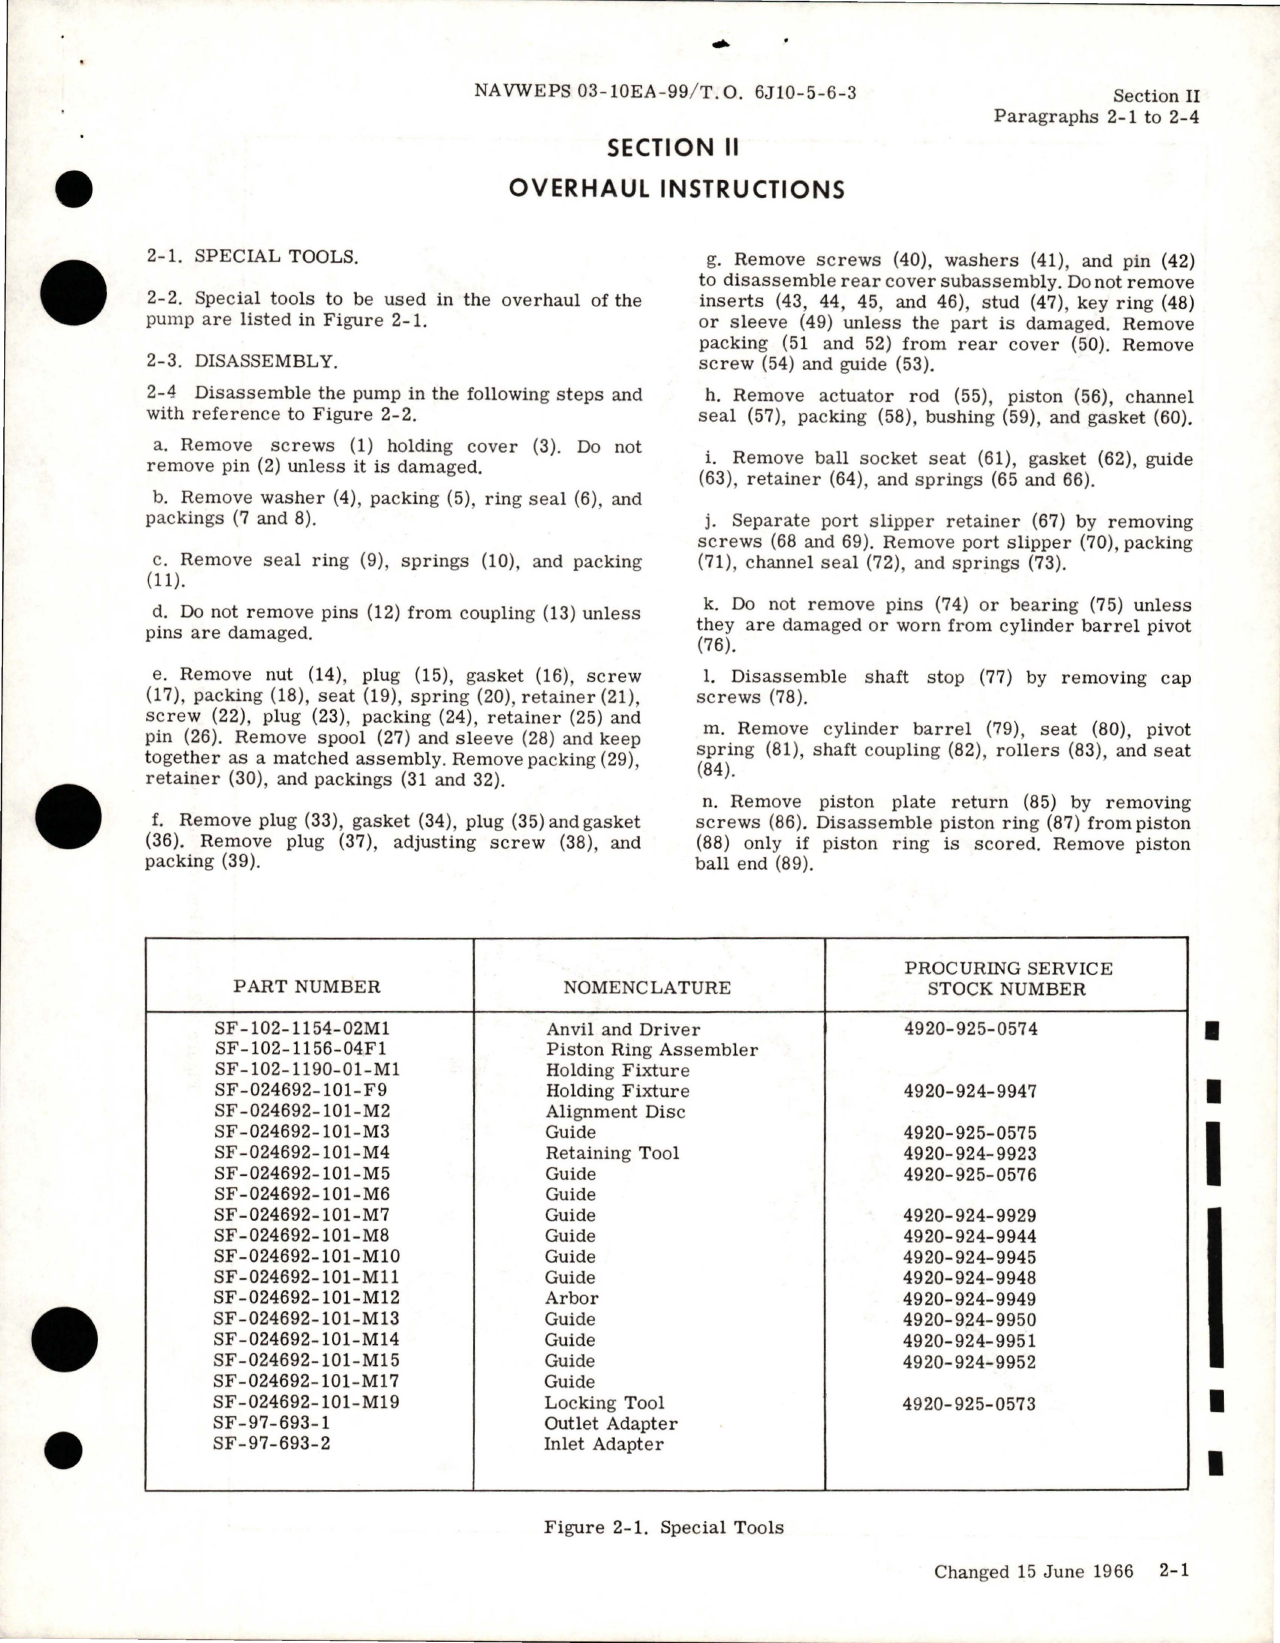 Sample page 7 from AirCorps Library document: Overhaul Instructions for Axial Piston Pump Assembly - 024693 Series